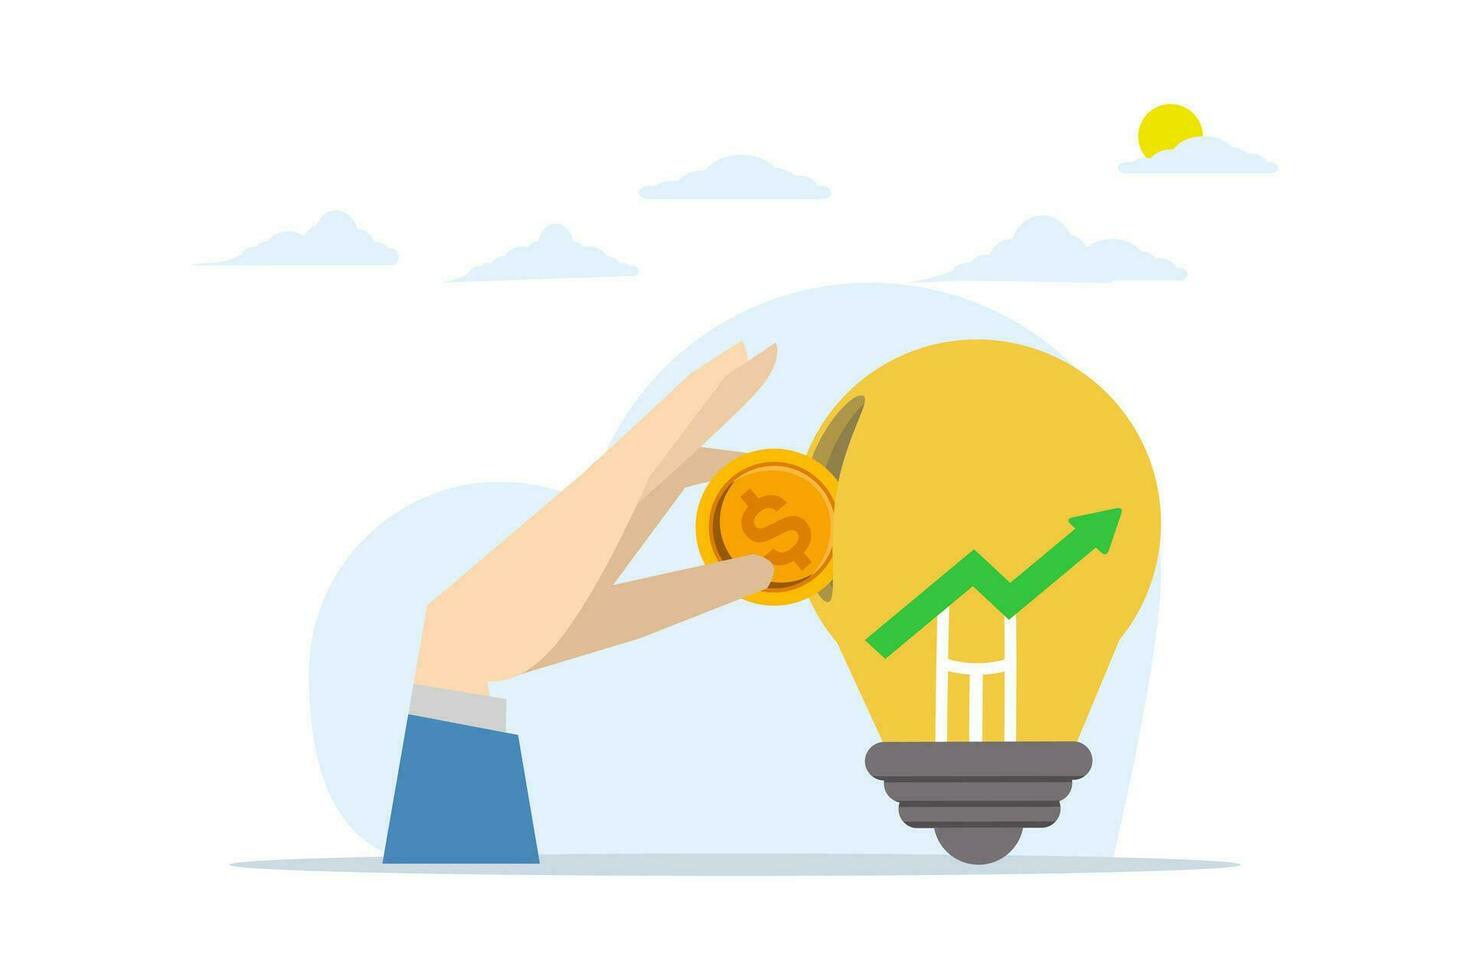 Concept of investing in growth stocks, mutual funds or growth money, savings, retirement funds or increasing profits from stock market, businessman inserting coins into growth chart light bulb. vector